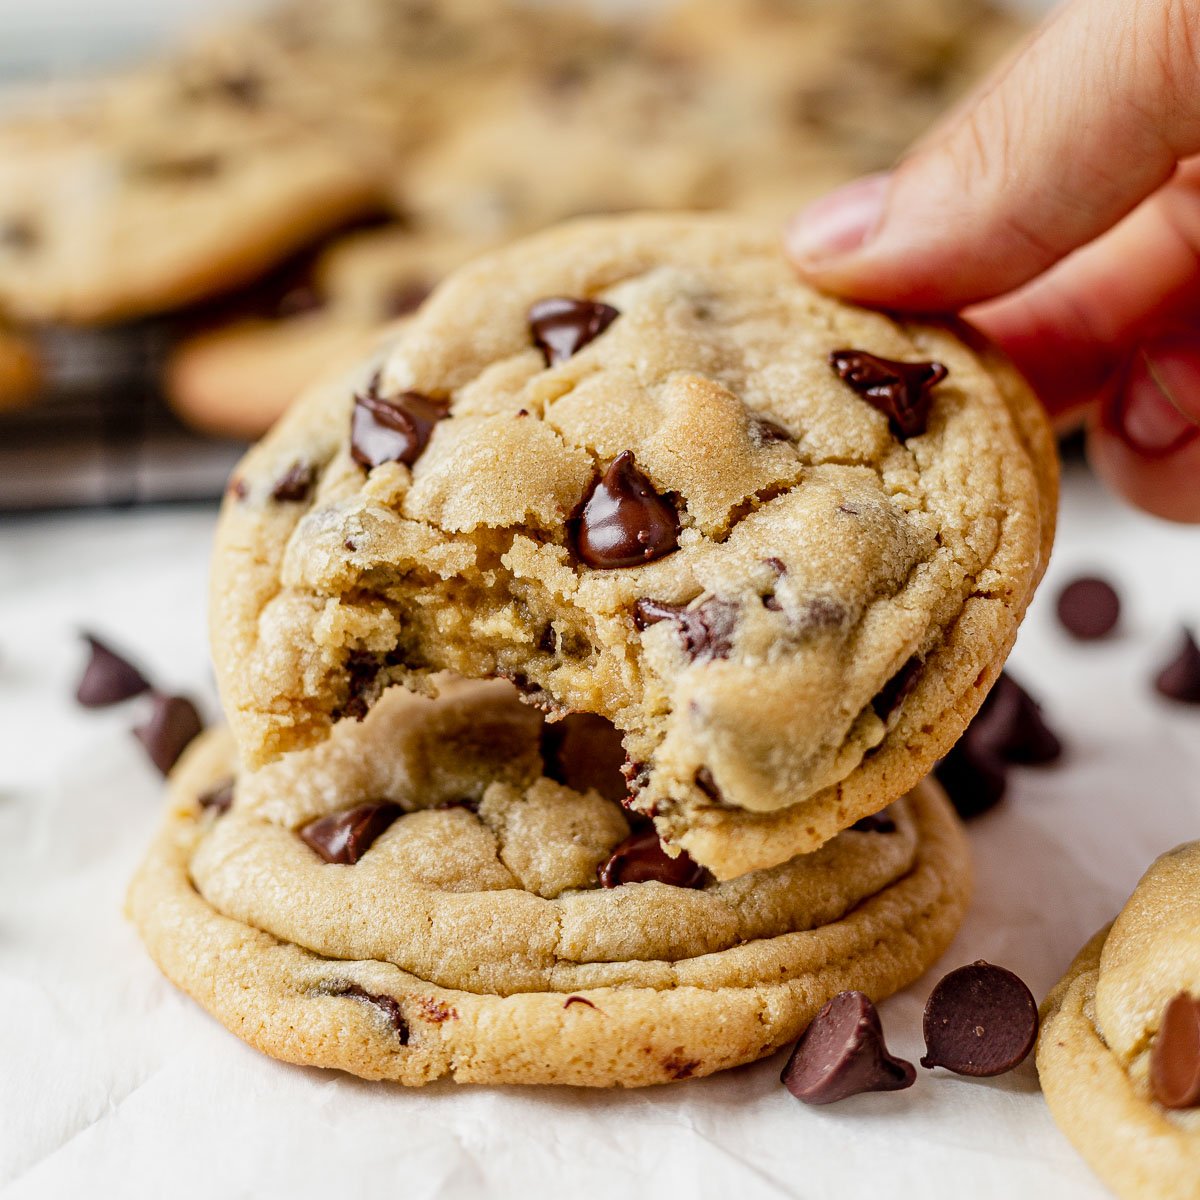 https://whatmollymade.com/wp-content/uploads/2017/03/chocolate-chip-pudding-cookies-recipe.jpg